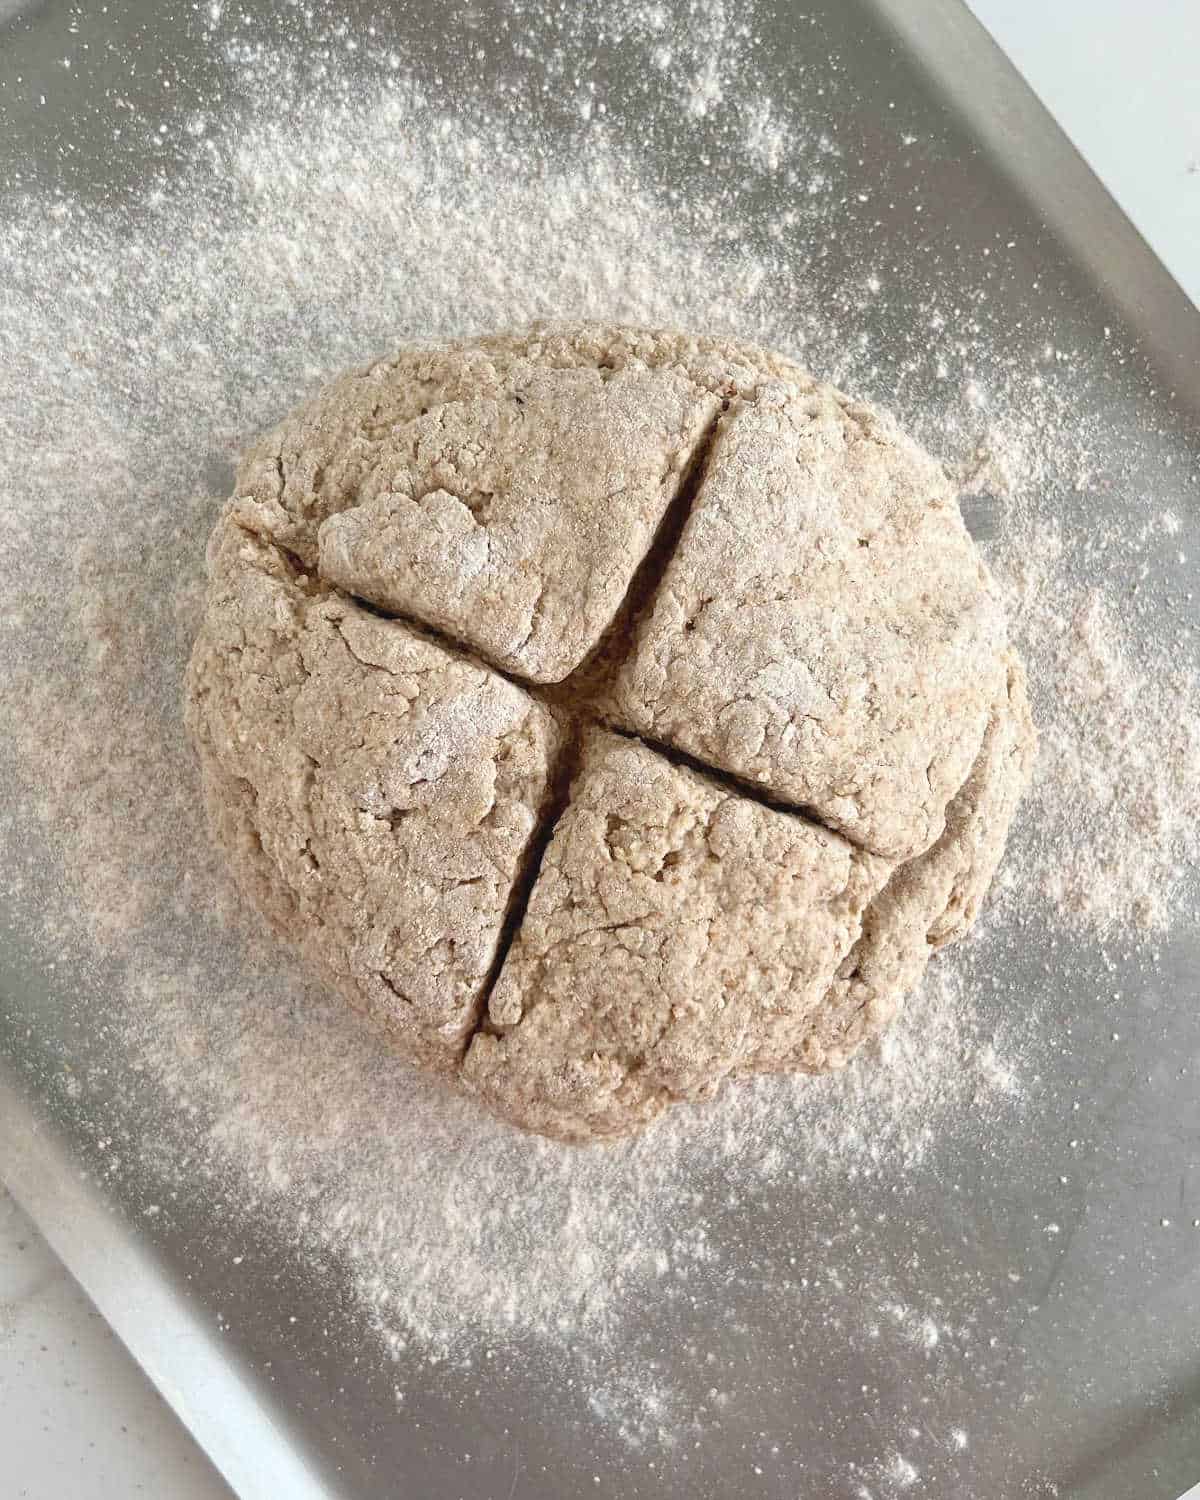 Round loaf of whole wheat bread dough with a cross on top on a floured metal baking sheet.